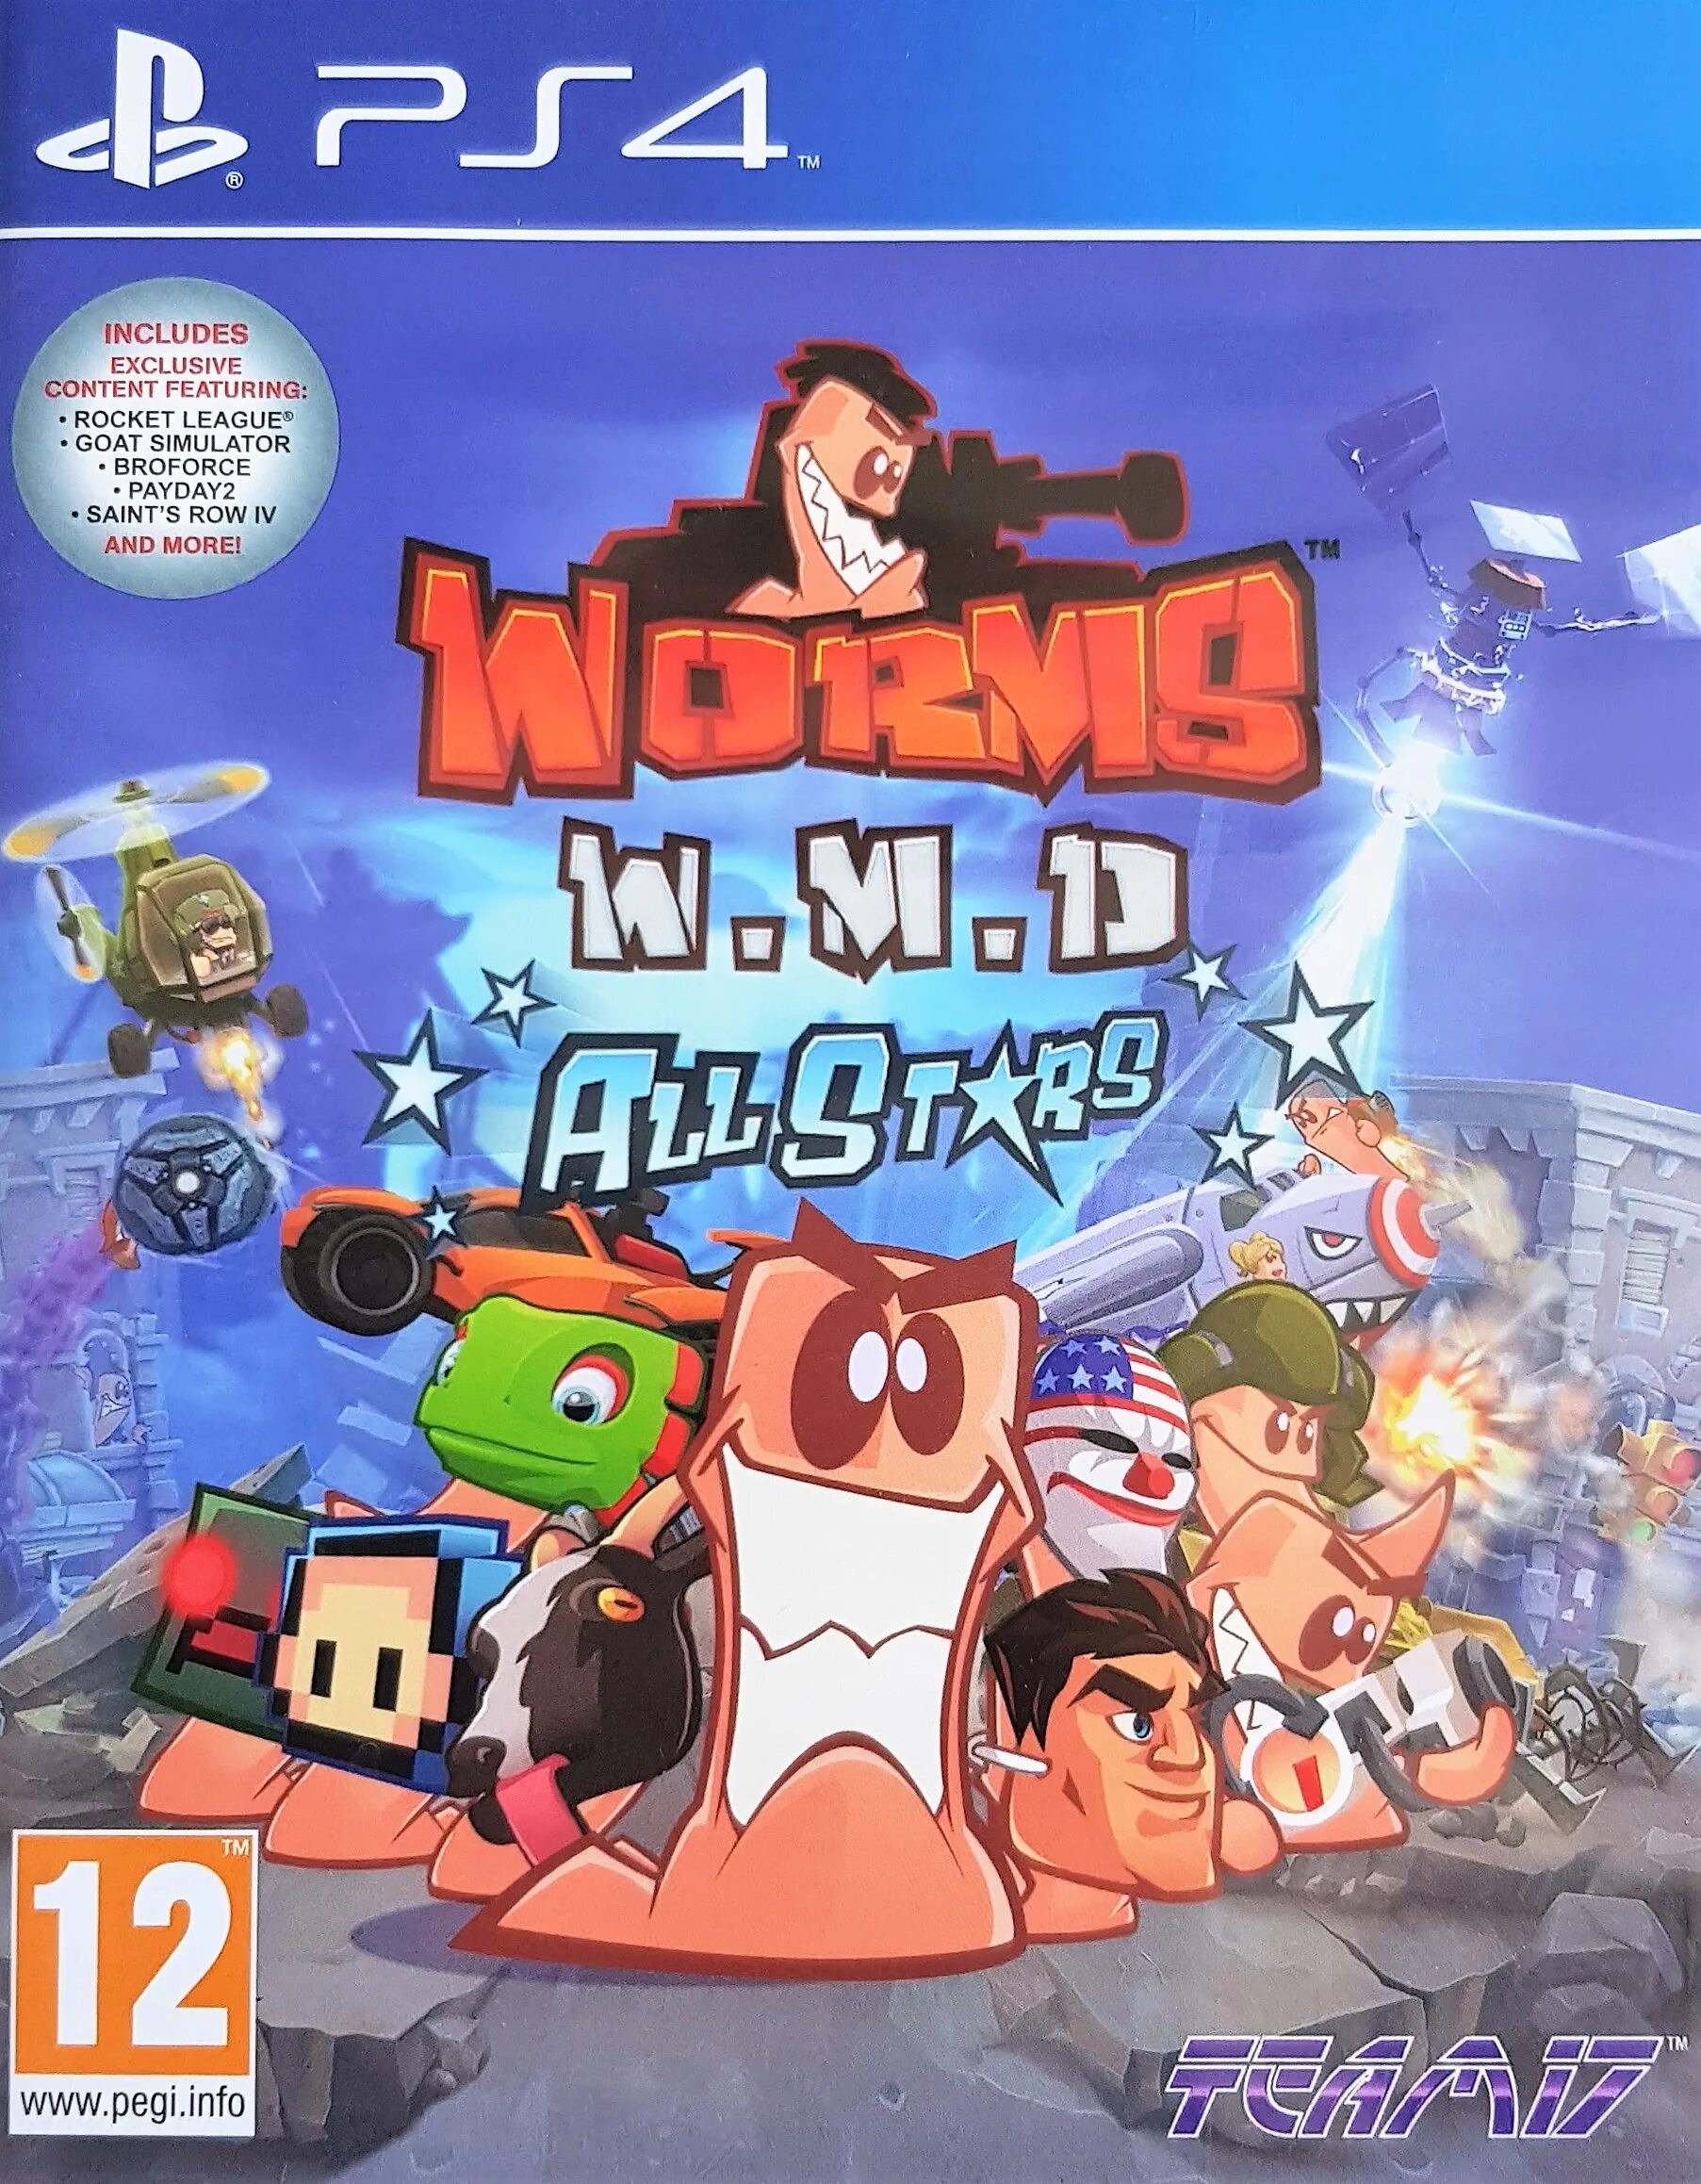 Worms ps4. Worms w.m.d ps4. Worms WMD ps4. Worms Battlegrounds (ps4). Worms w.m.d. all Stars (ps4).